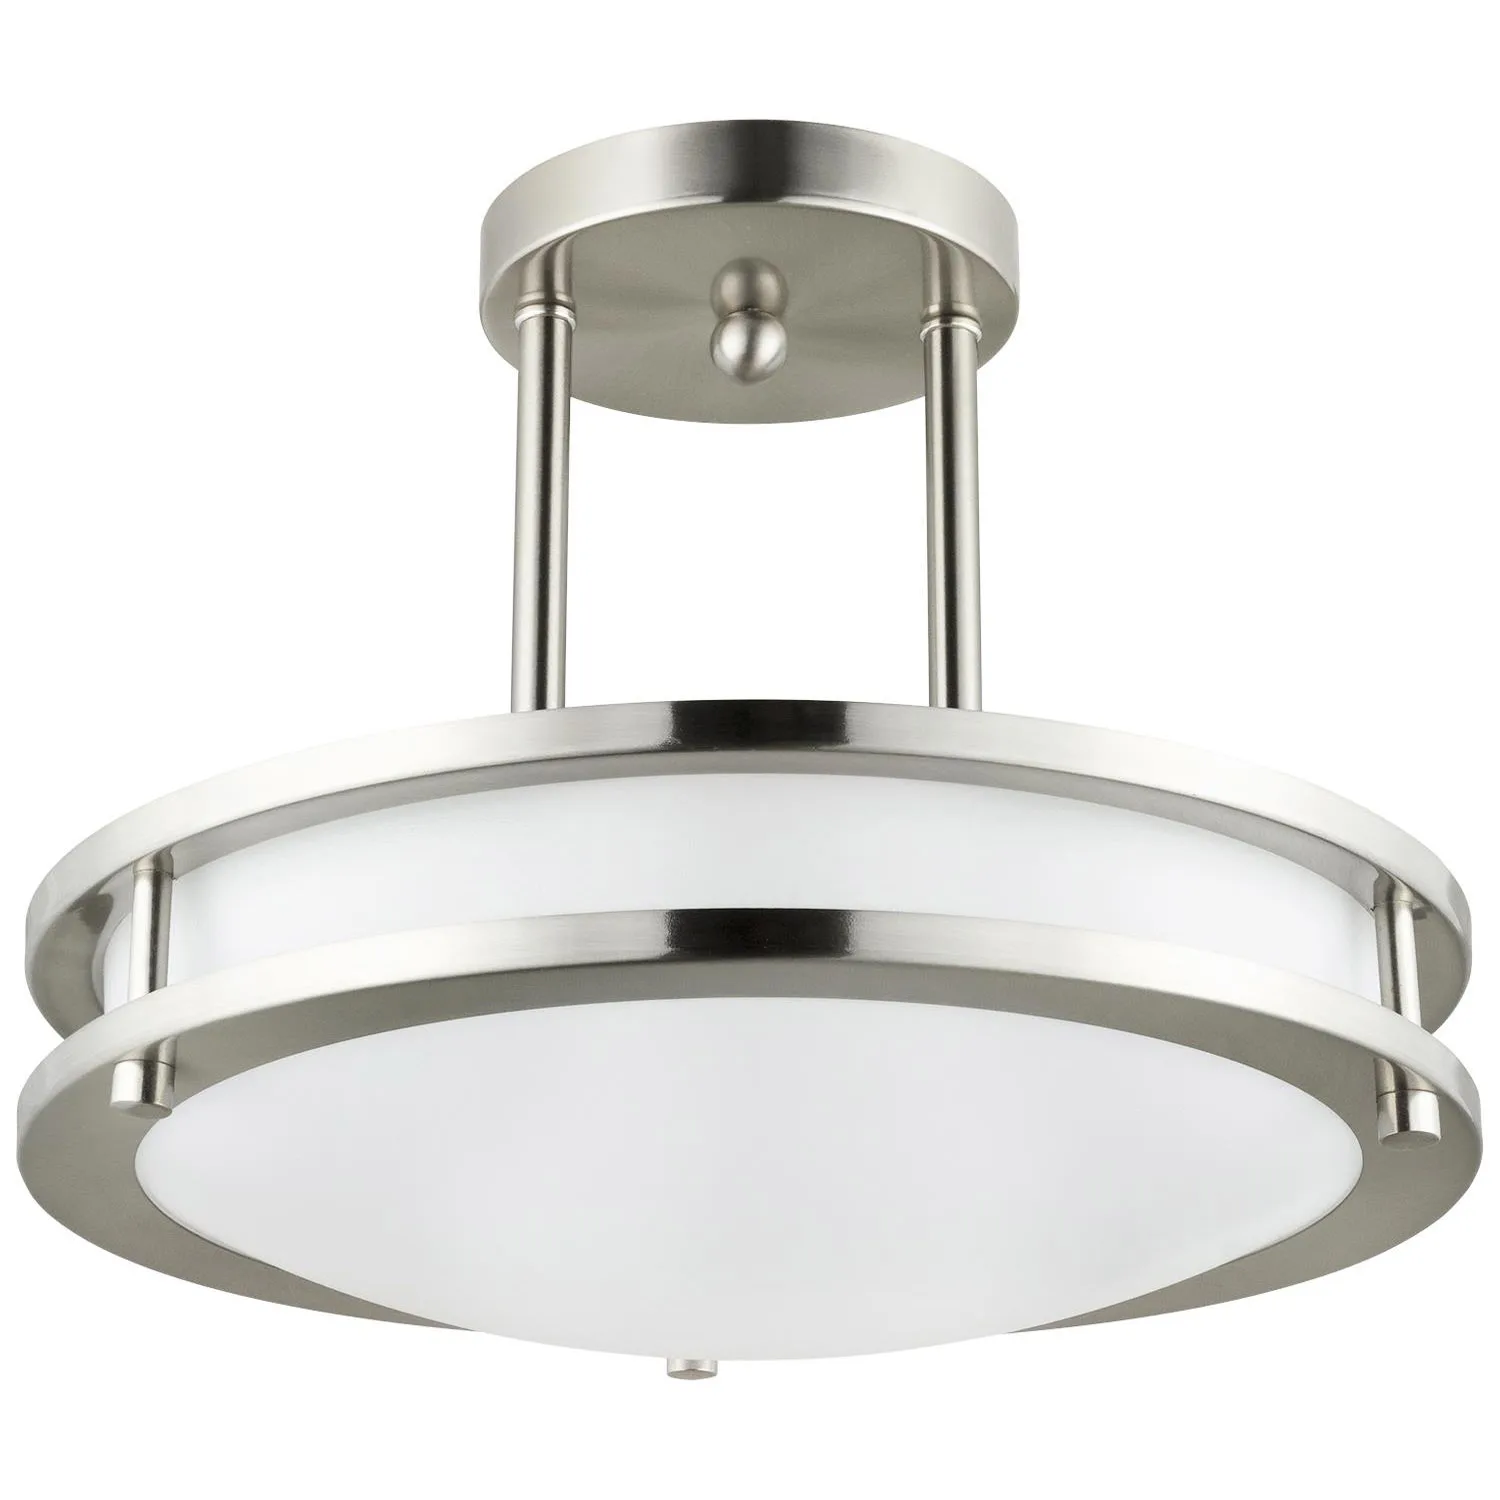 High quality Sunlite LED Pendant Semi Flush Mount Ceiling Fixture, 15 Watts, Dimmable, 30K - Warm White, Brushed Nickel Finish